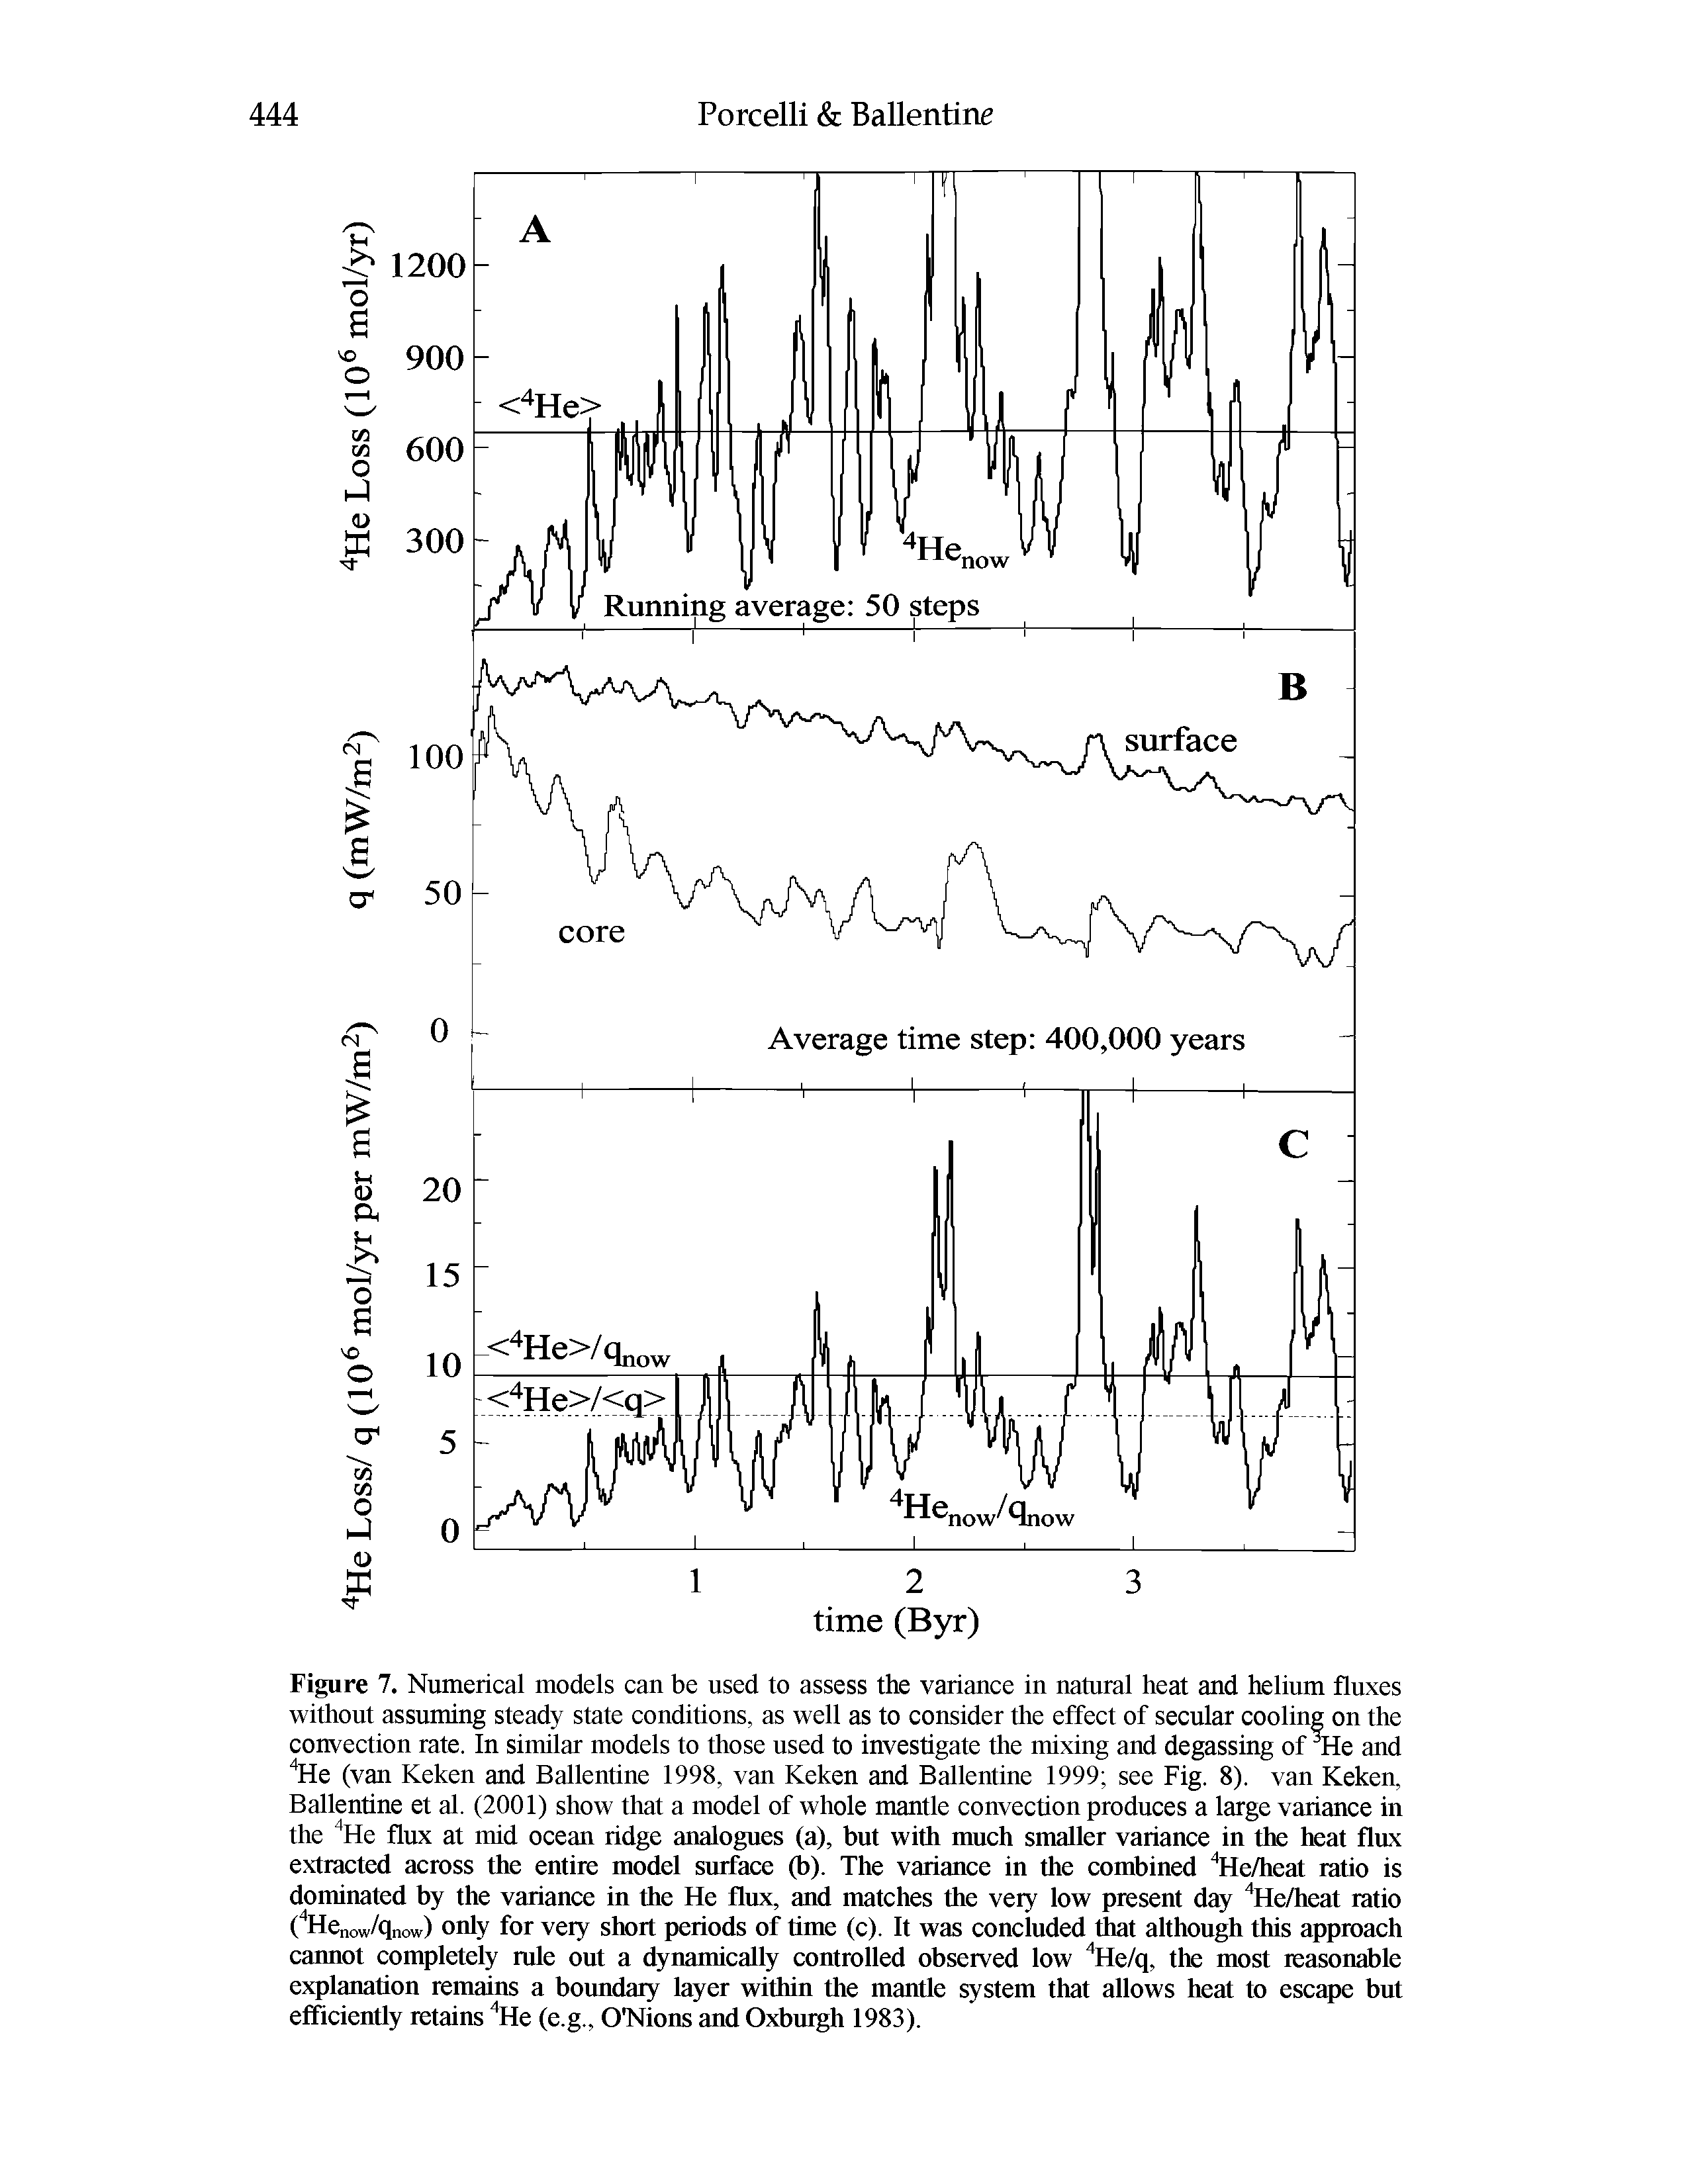 Figure 7. Numerical models can be used to assess the variance in natural heat and helium fluxes without assuming steady state conditions, as well as to consider the effect of secular cooling on the convection rate. In similar models to those used to investigate the mixing and degassing of me and " He (van Keken and Ballentine 1998, van Keken and Ballentine 1999 see Fig. 8). van Keken, Ballentine et al. (2001) show that a model of whole mantle convection produces a large variance in the " He flux at mid ocean ridge analogues (a), but with much smaller variance in the heat flux extracted across the entire model surface (b). The variance in the combined ""He/heat ratio is dominated by the variance in the He flux, and matches the very low present day " He/heat ratio ( He...